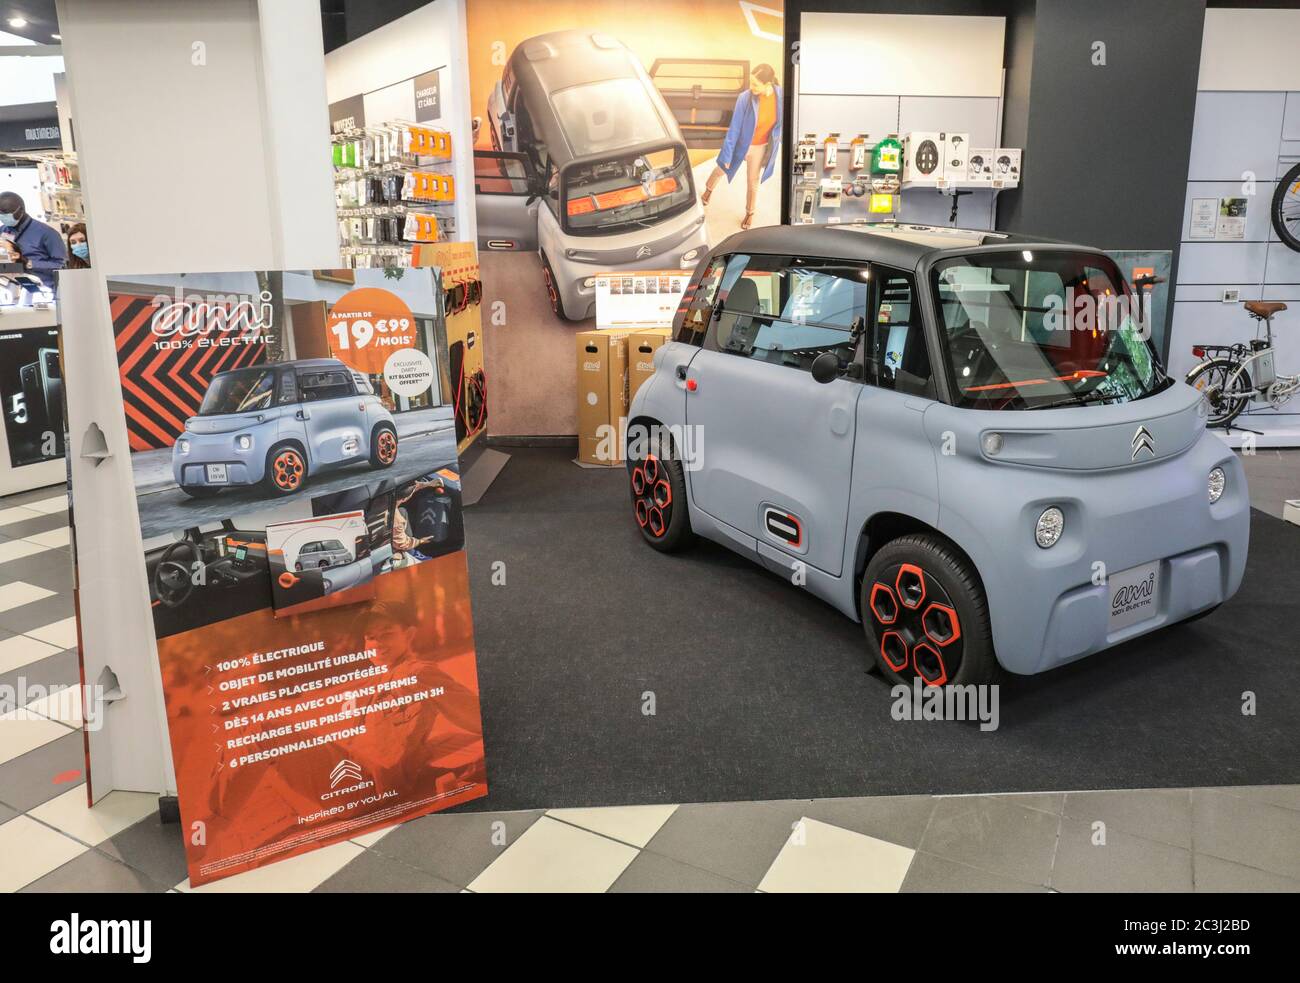 AMI BY CITROEN ,THE FRENCH ELECTRIC CAR Stock Photo